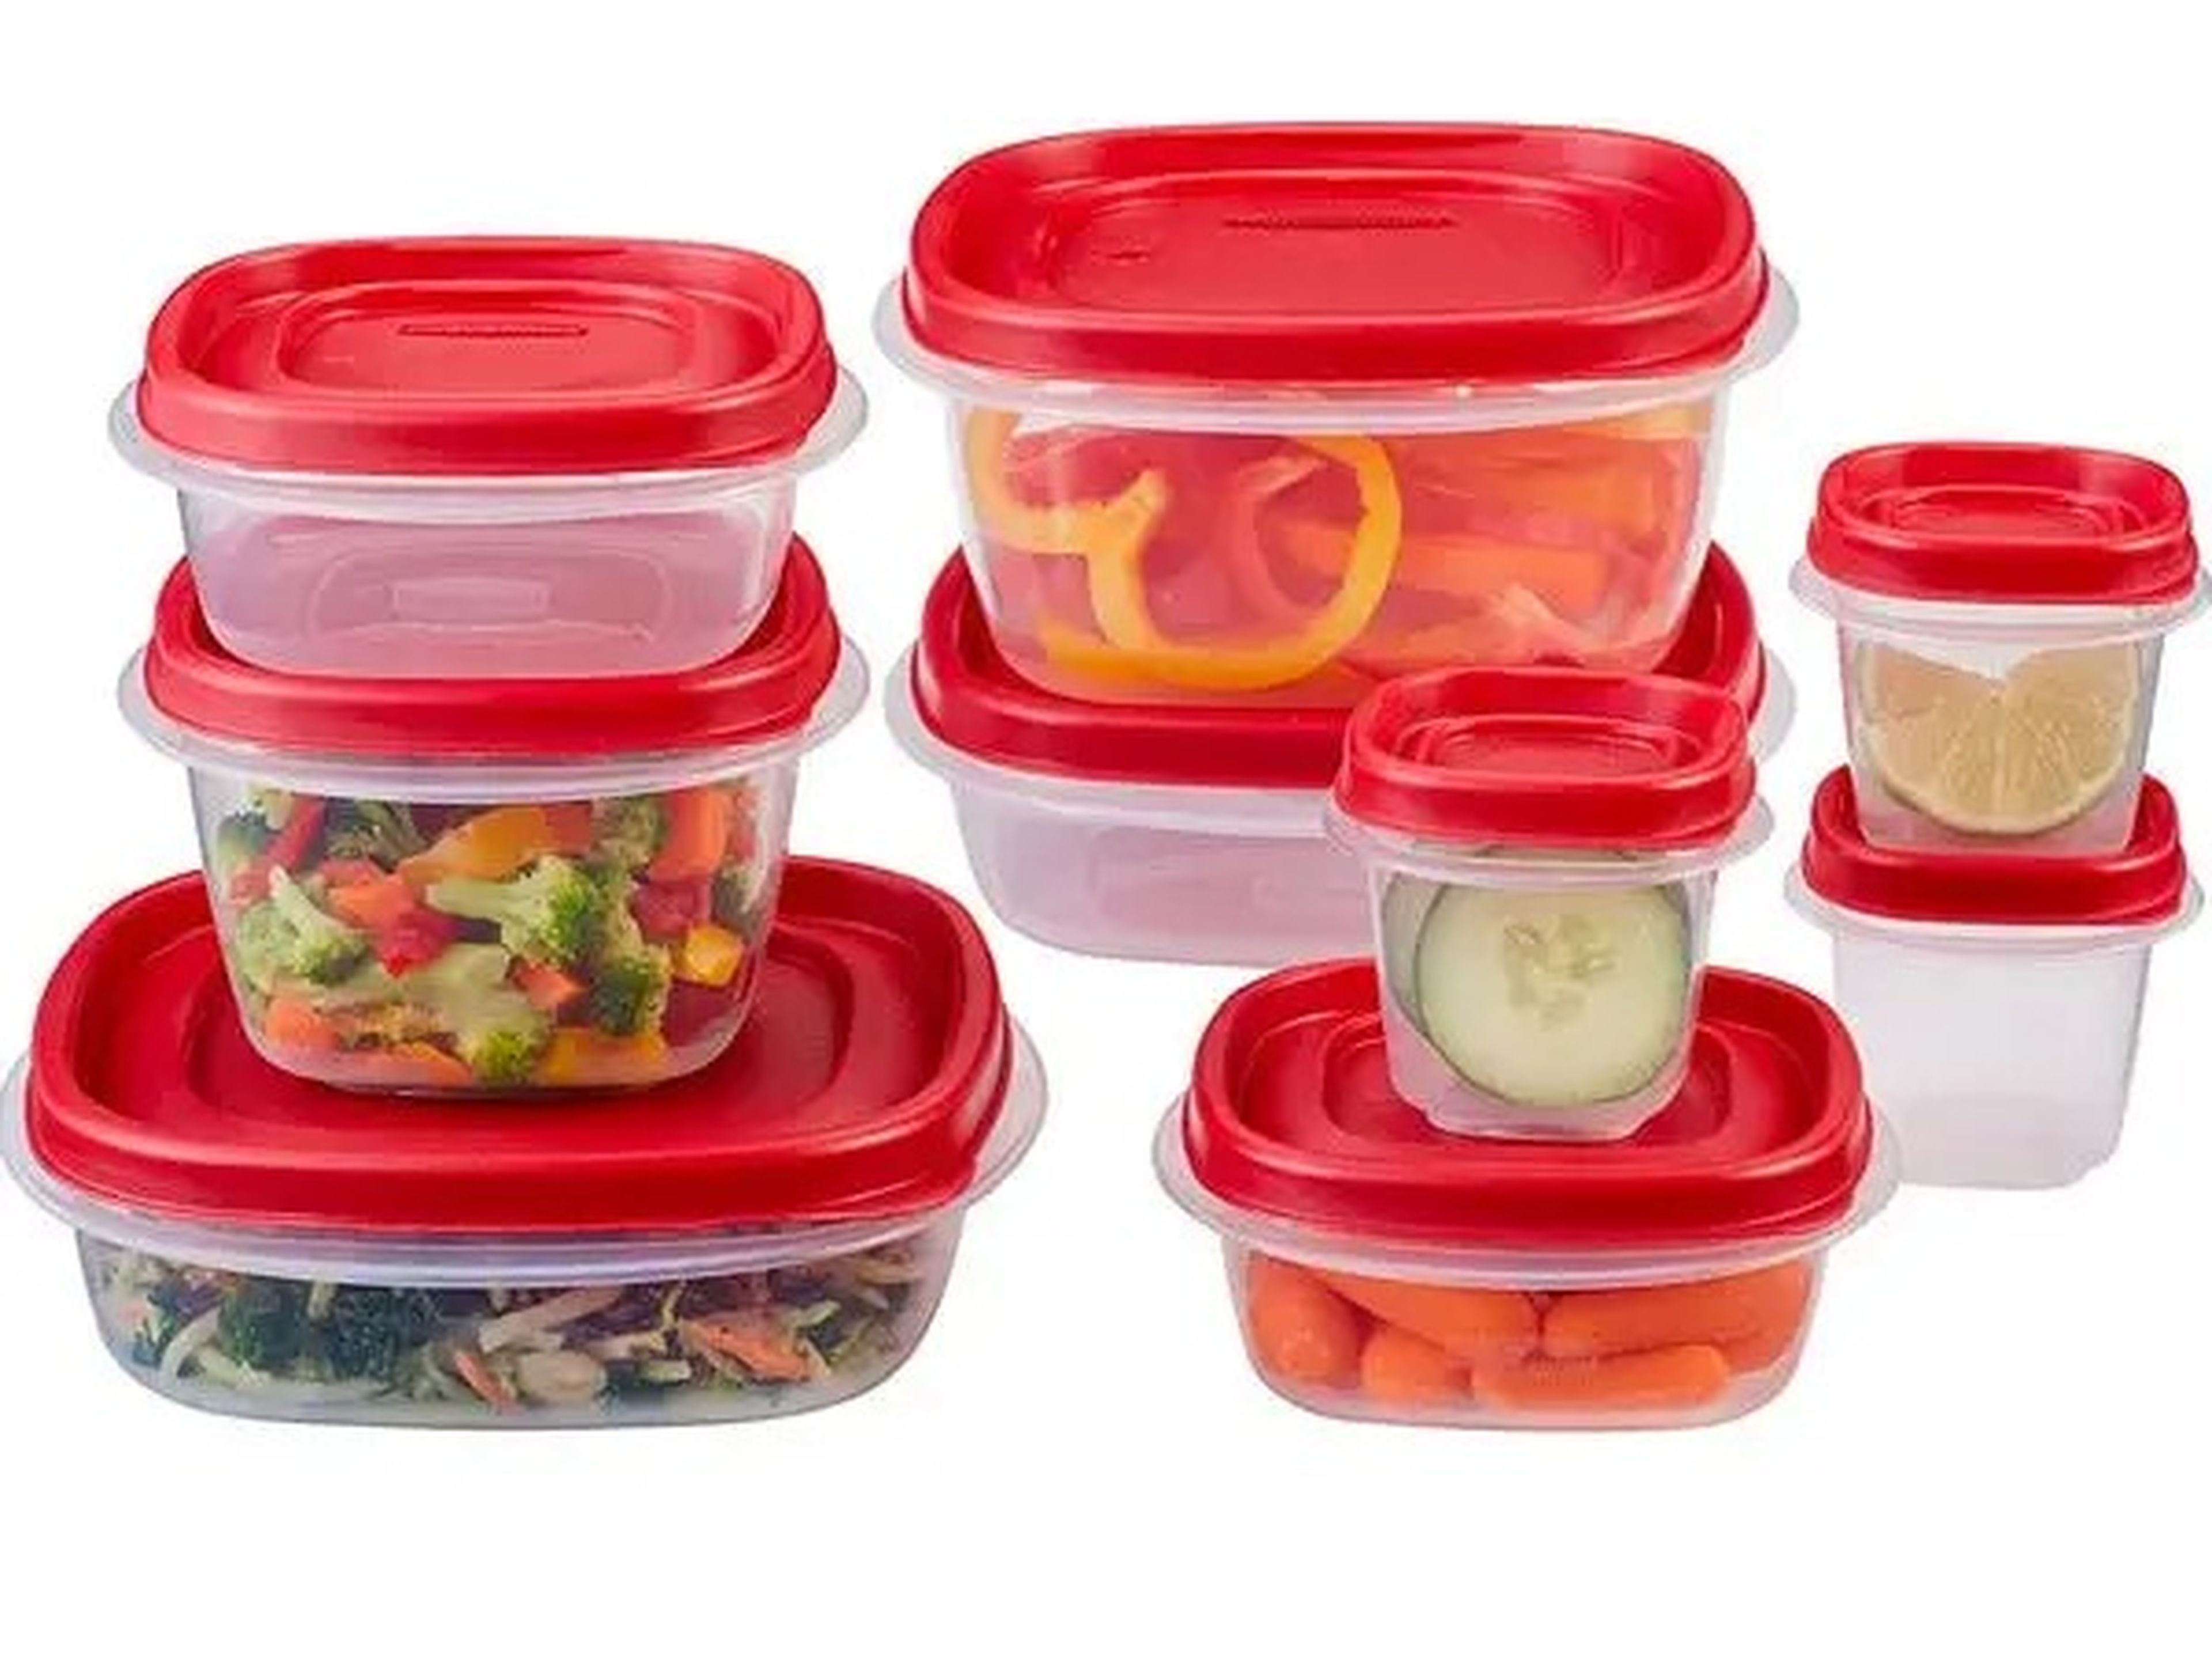 The Rubbermaid 18-piece tupperware set filled with different food items.